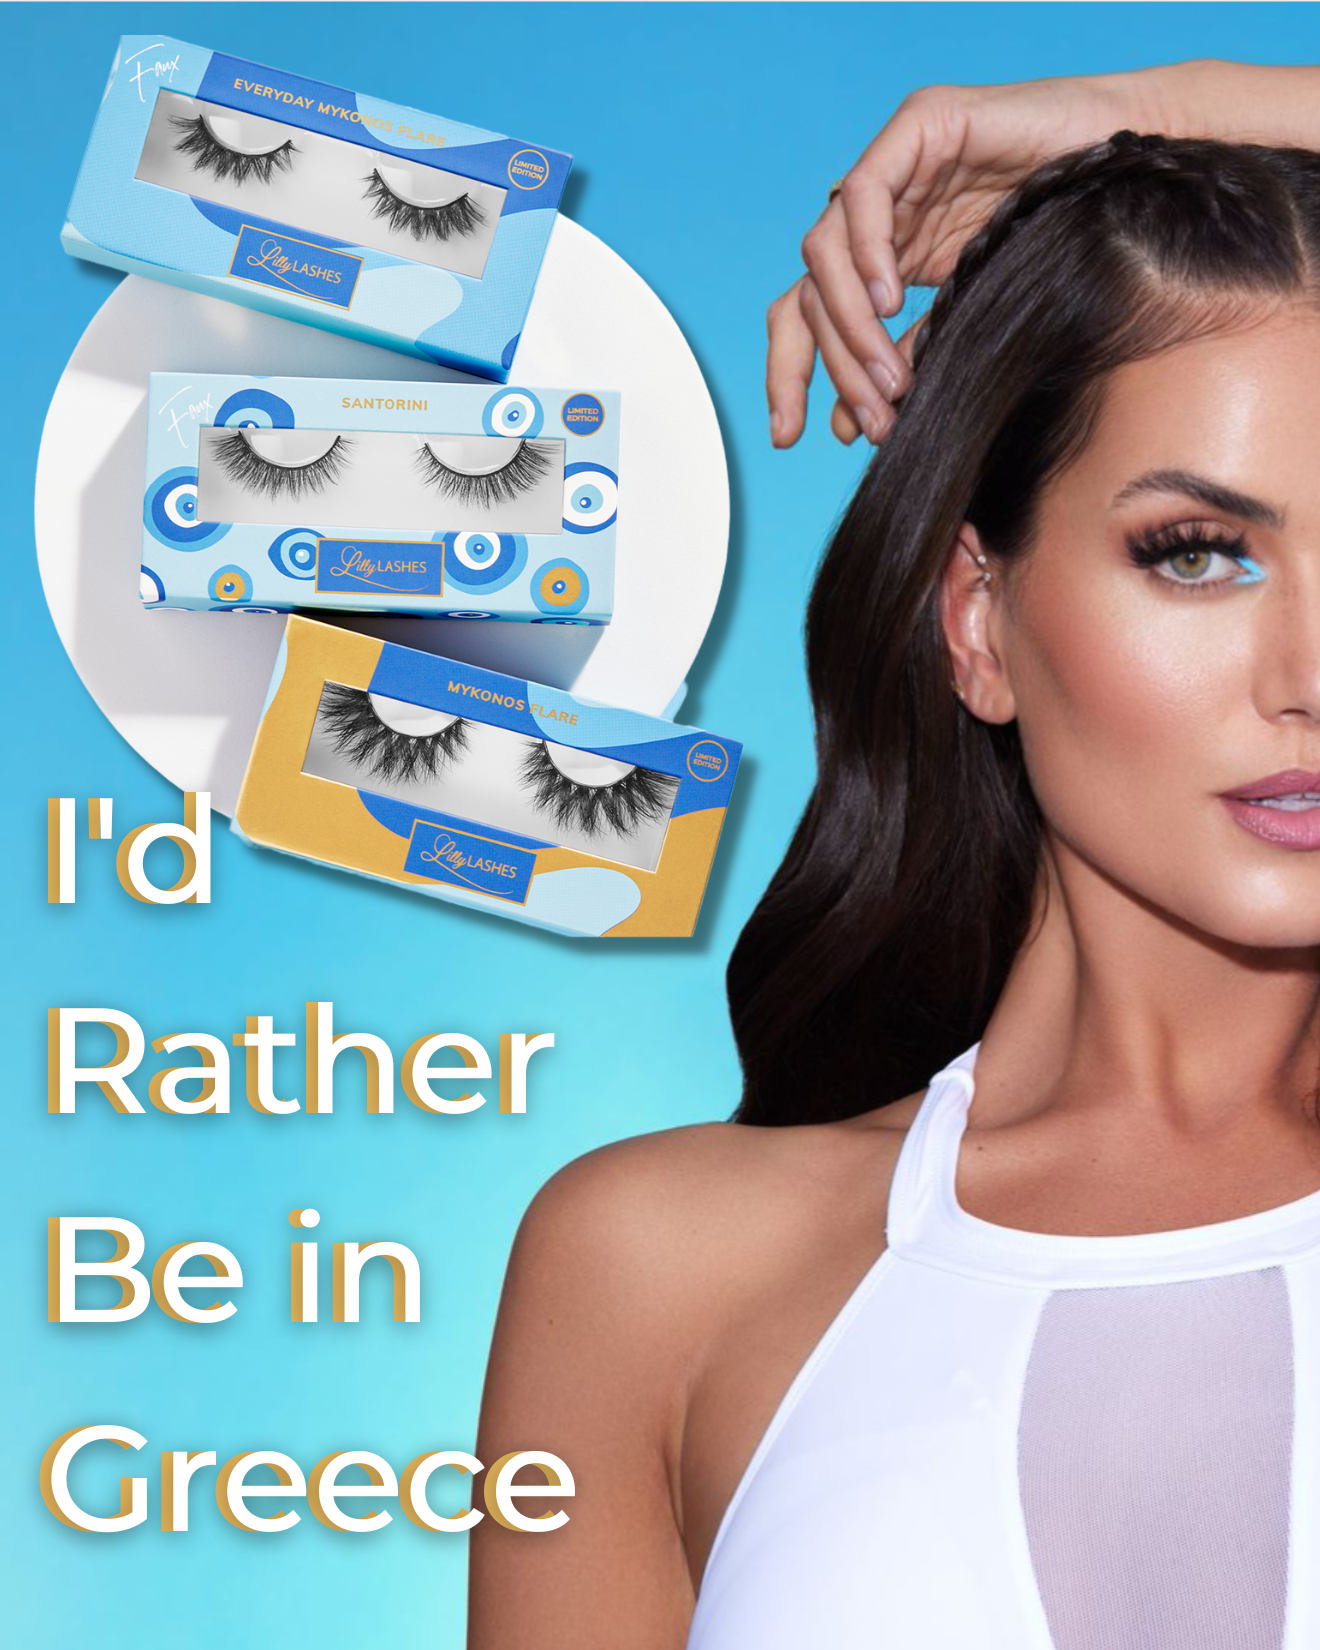 Limited Edition! I'd Rather Be in Greece Collection